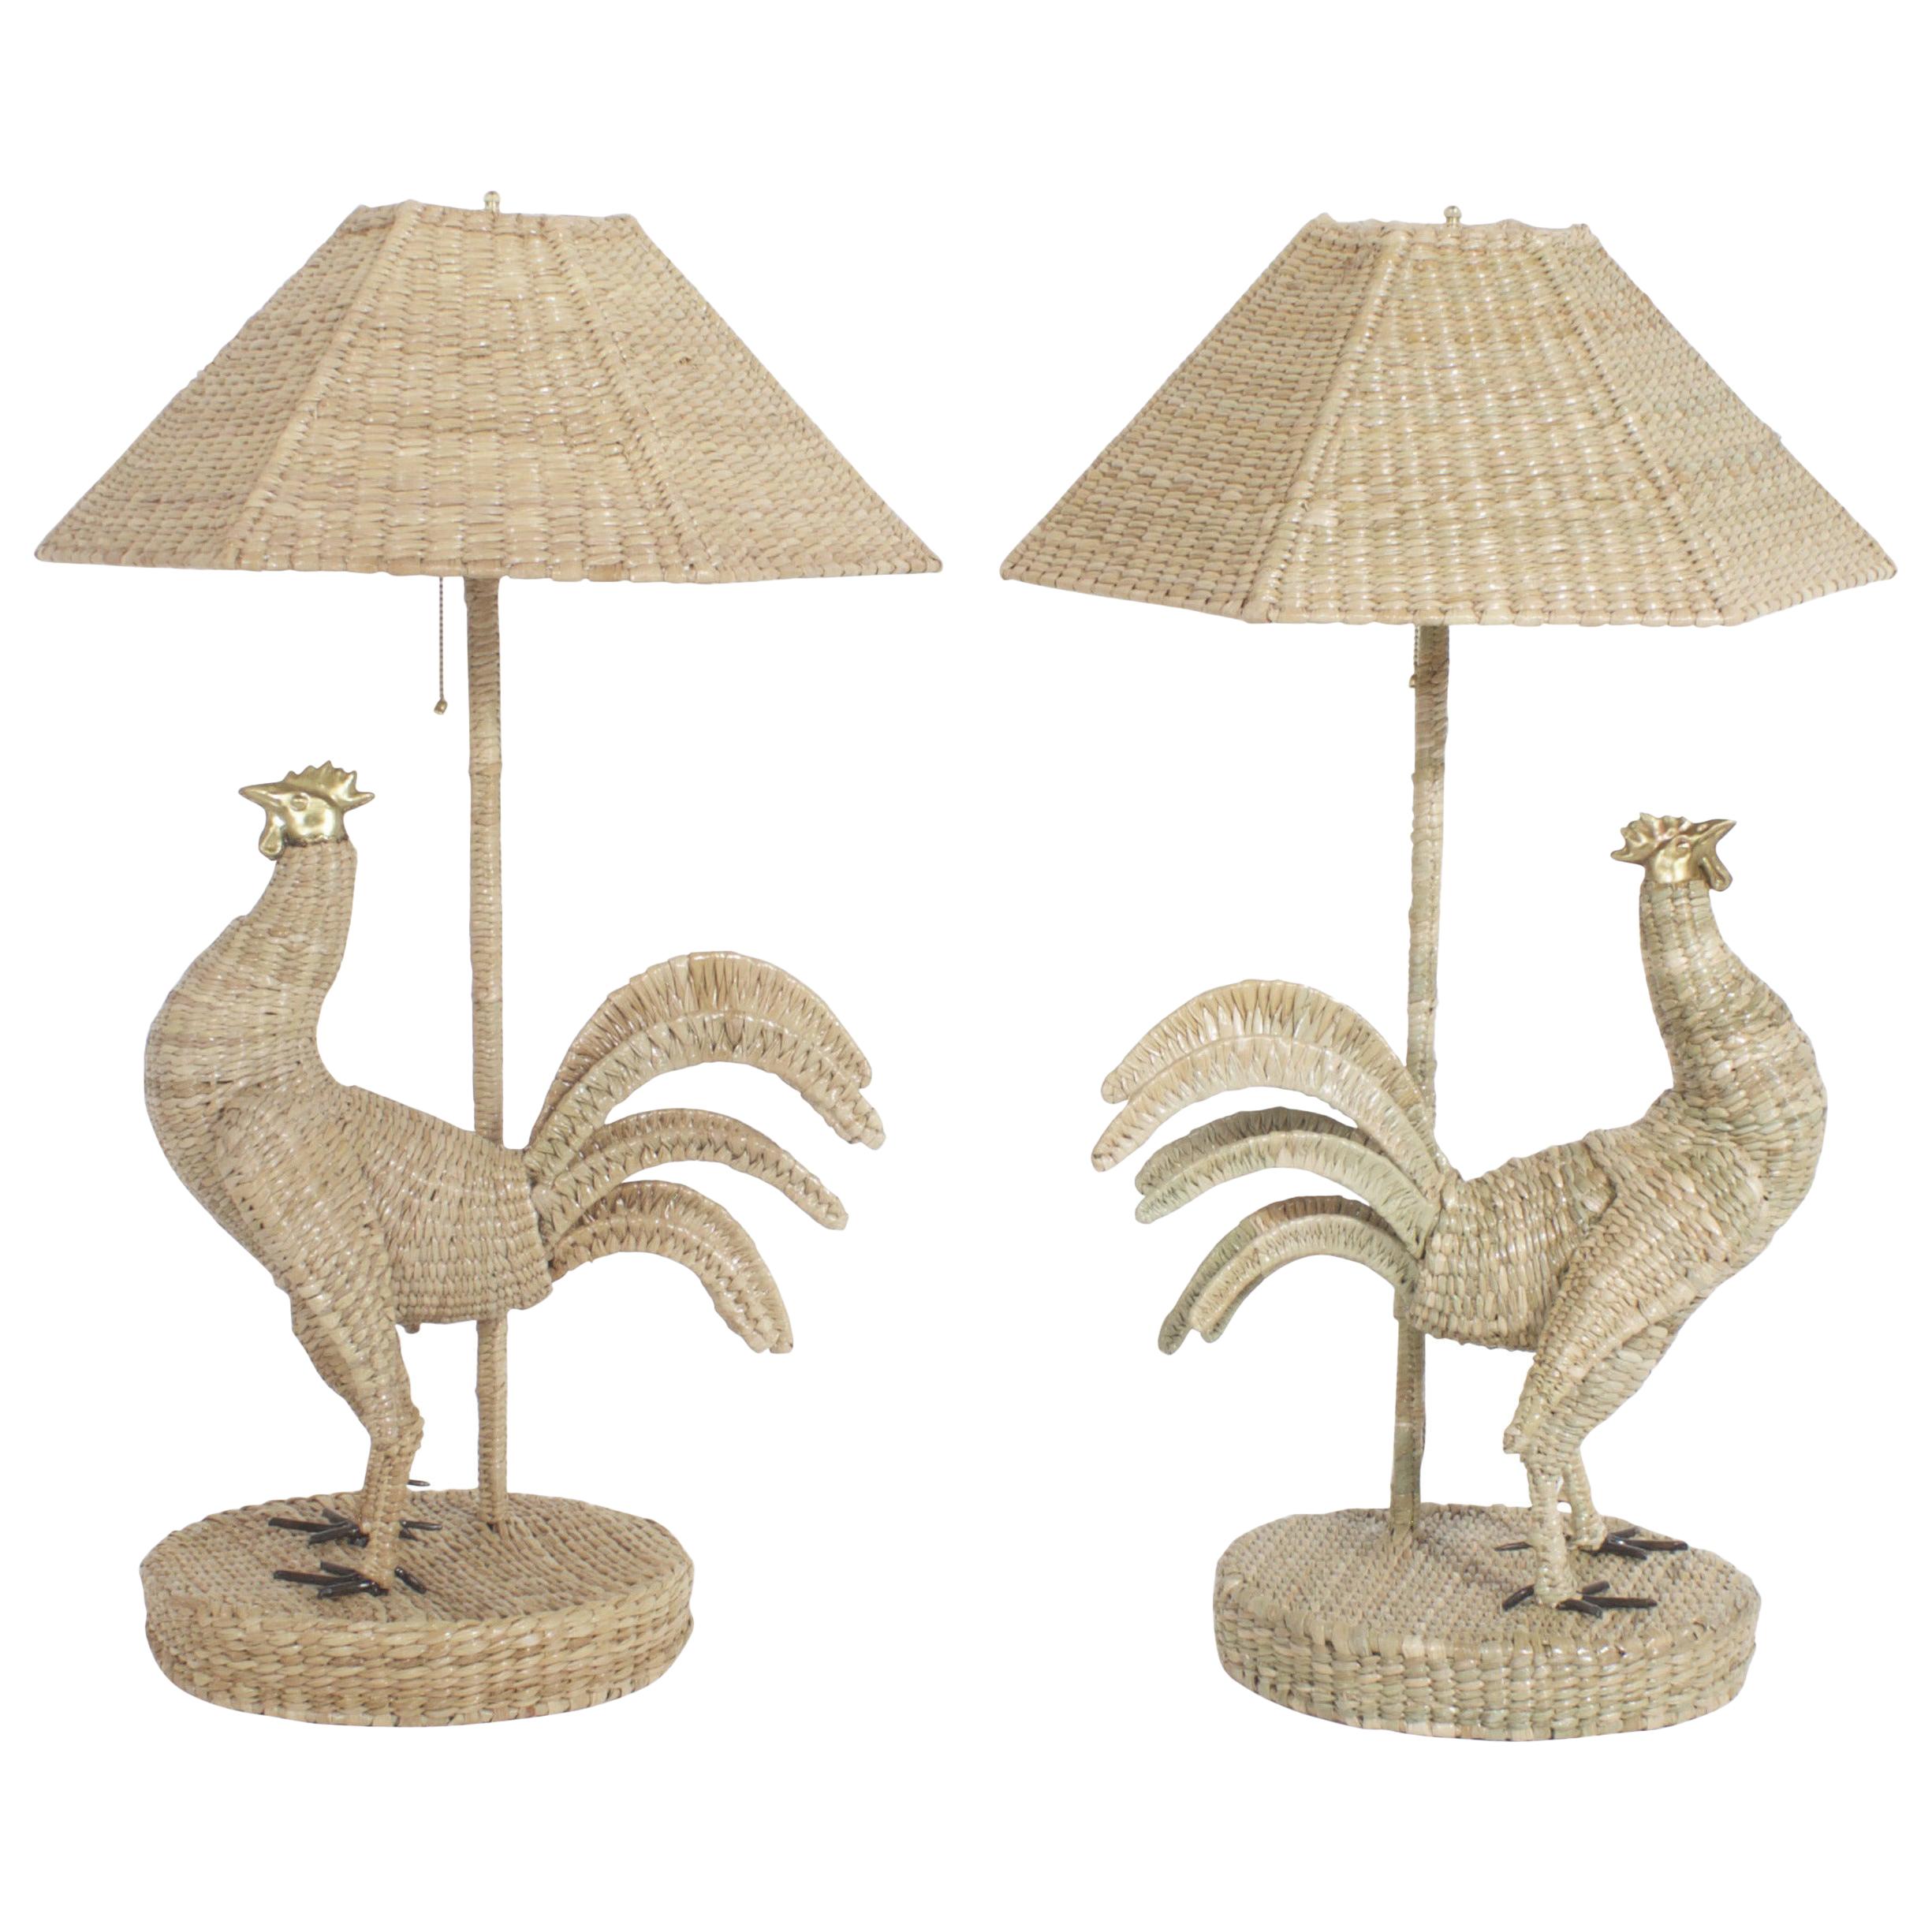 Pair of Mario Torres Rooster Table Lamps